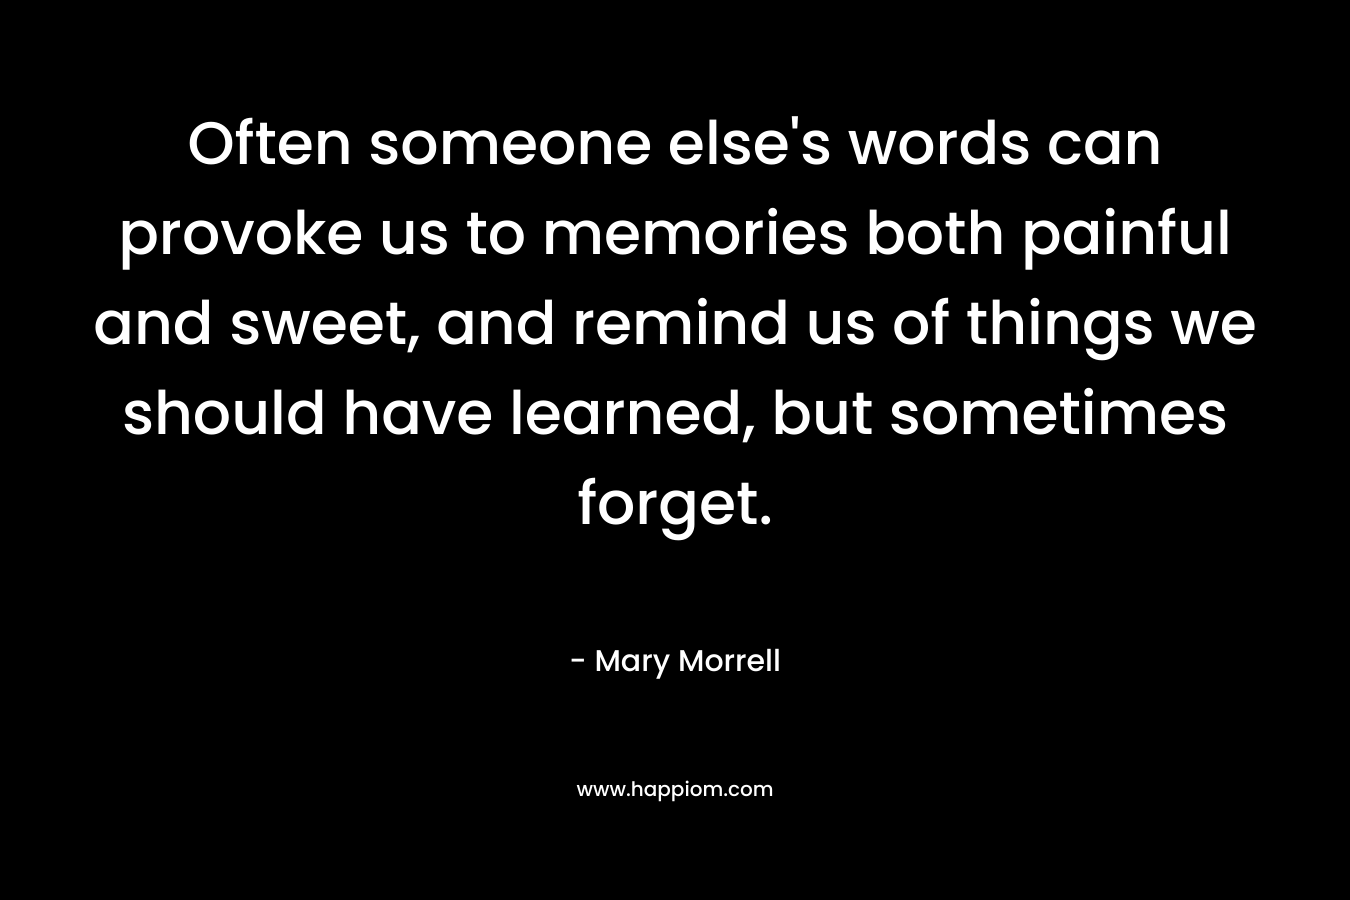 Often someone else's words can provoke us to memories both painful and sweet, and remind us of things we should have learned, but sometimes forget.